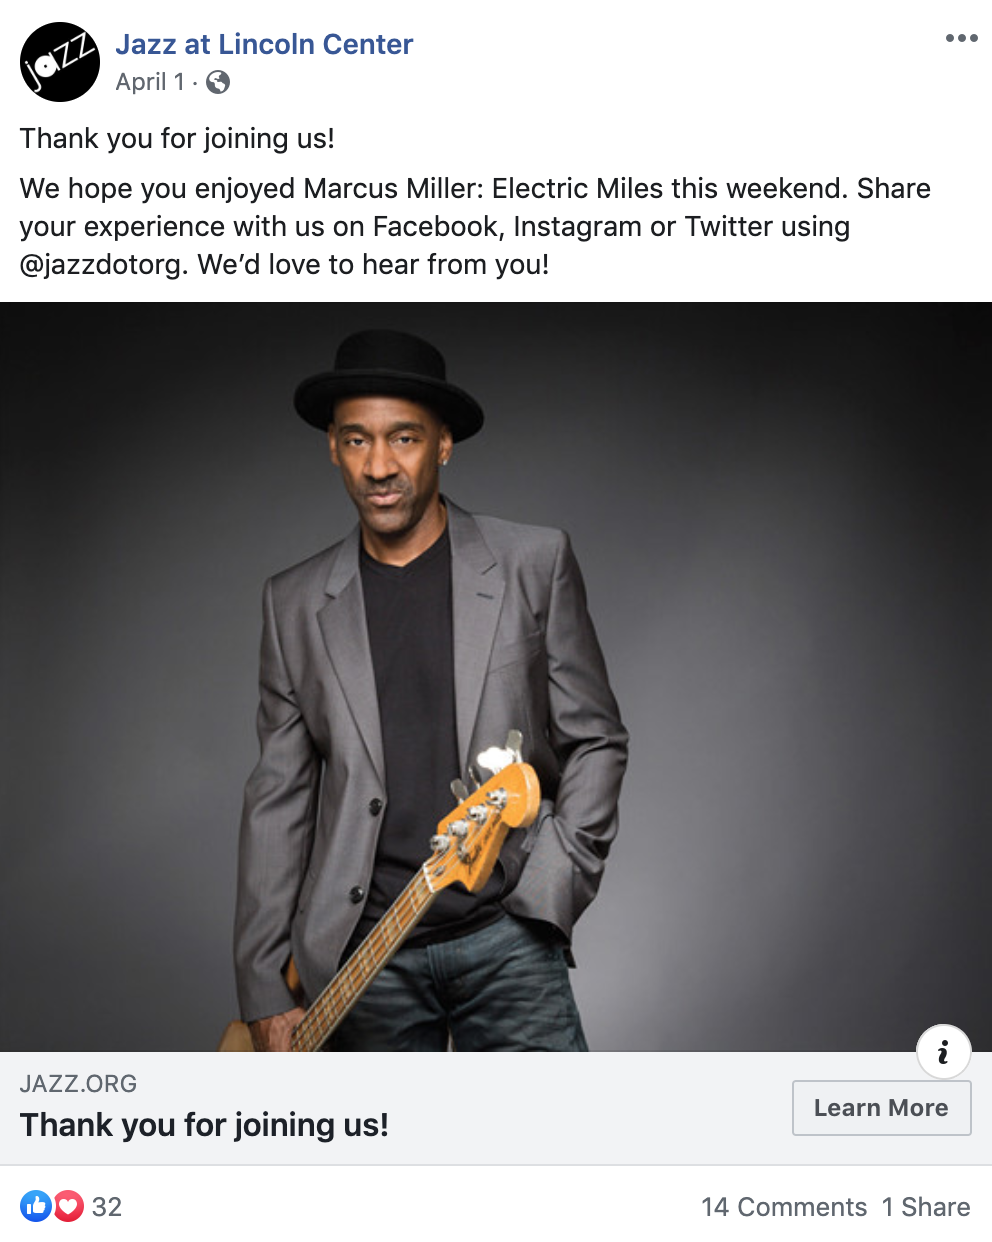 Jazz at Lincoln Center Facebook post thanking patrons for joining them to see Marcus Miller: Electric Miles and encouraging patrons to share their experience